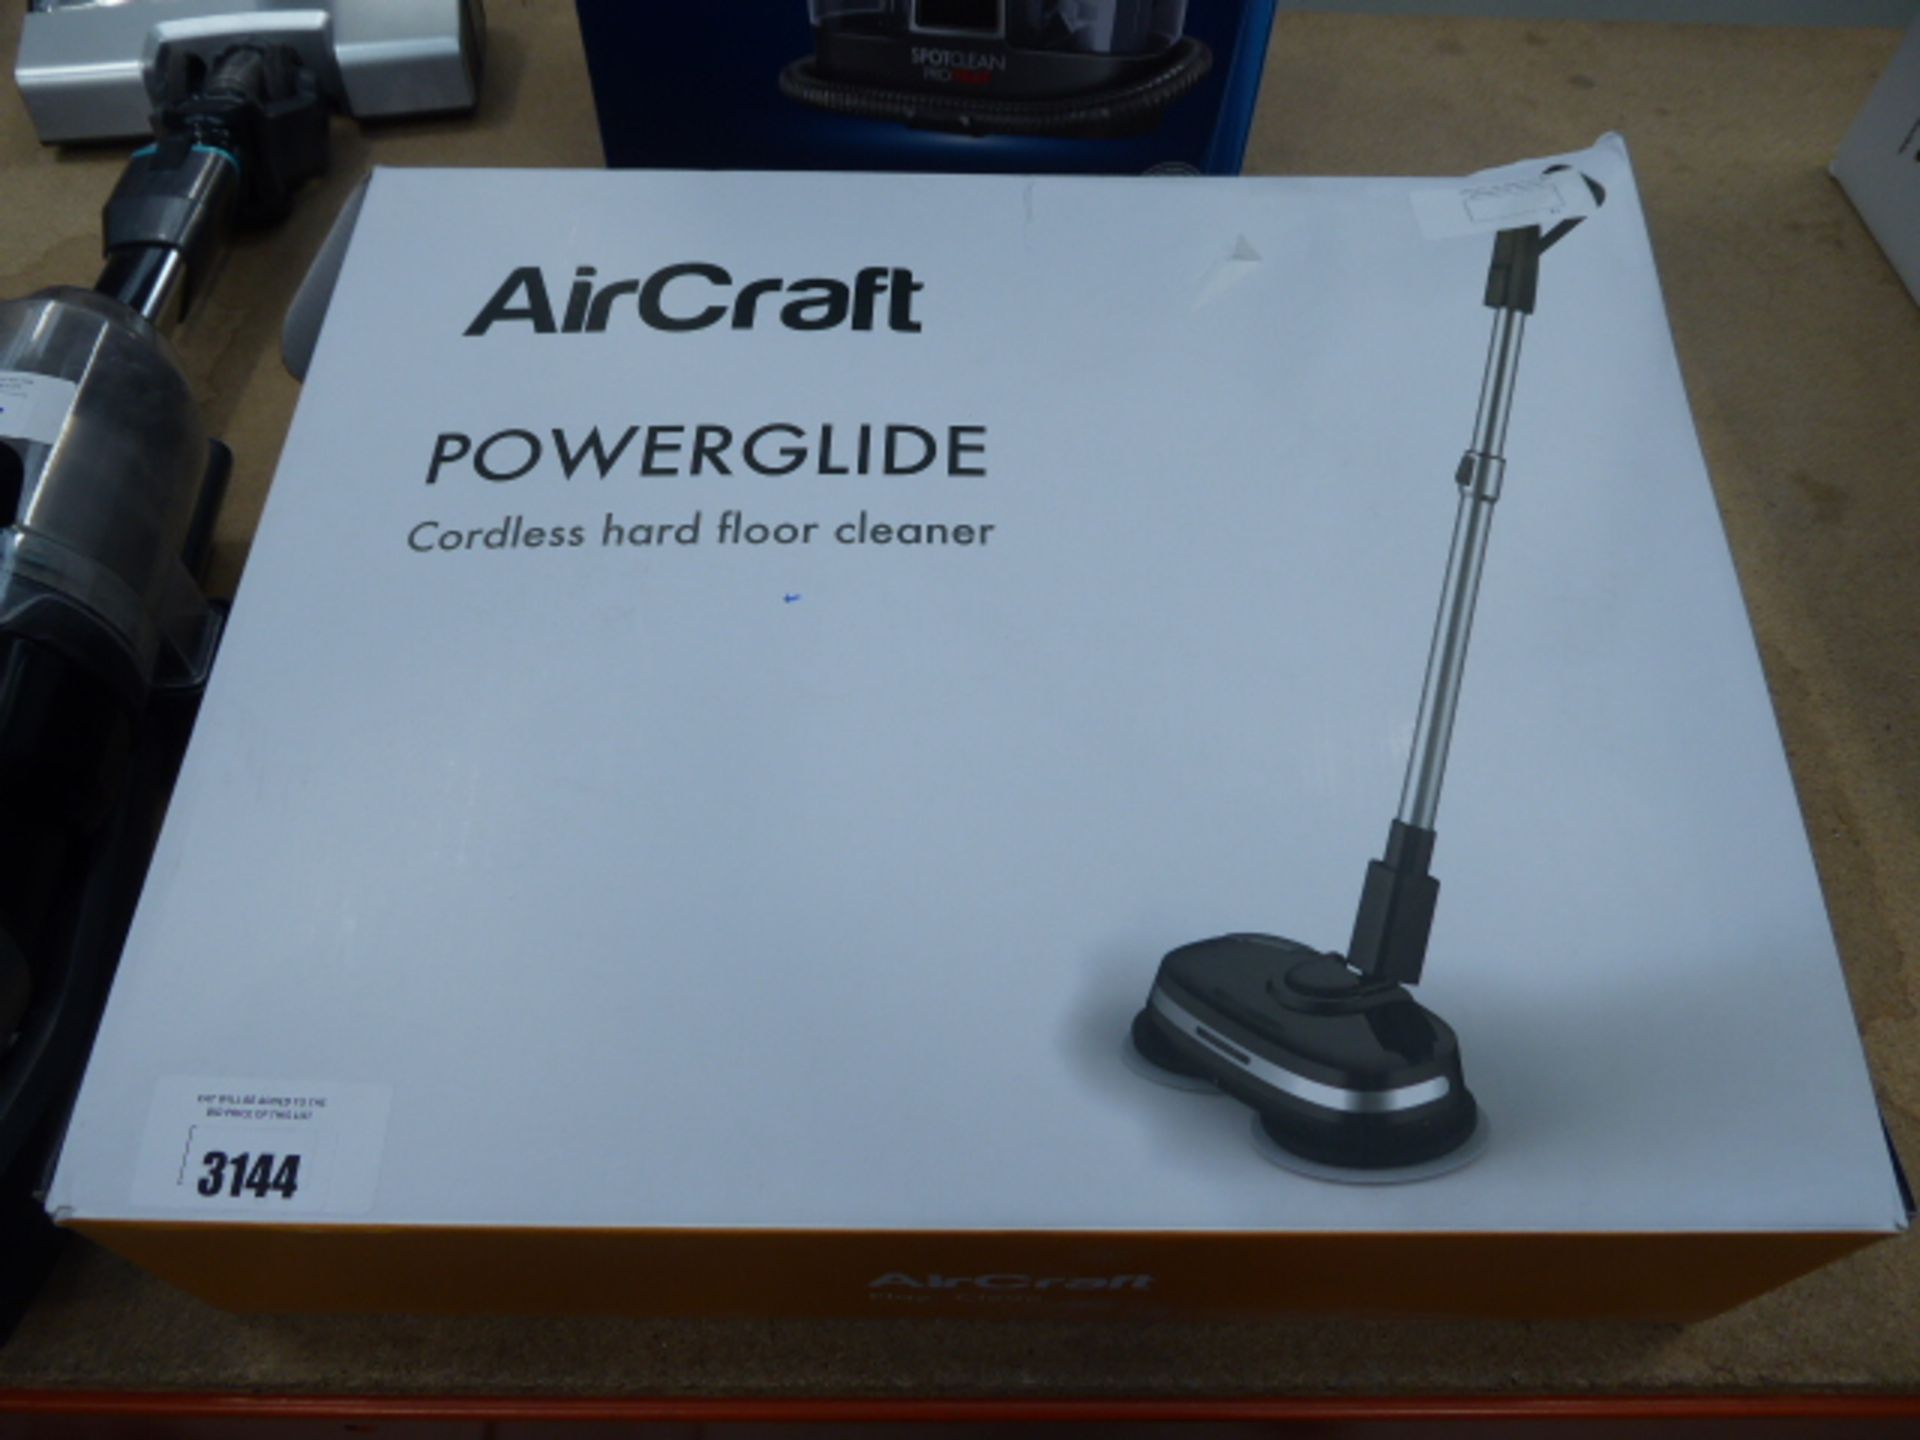 Boxed Aircraft Powerglide cordless hard floor cleaner